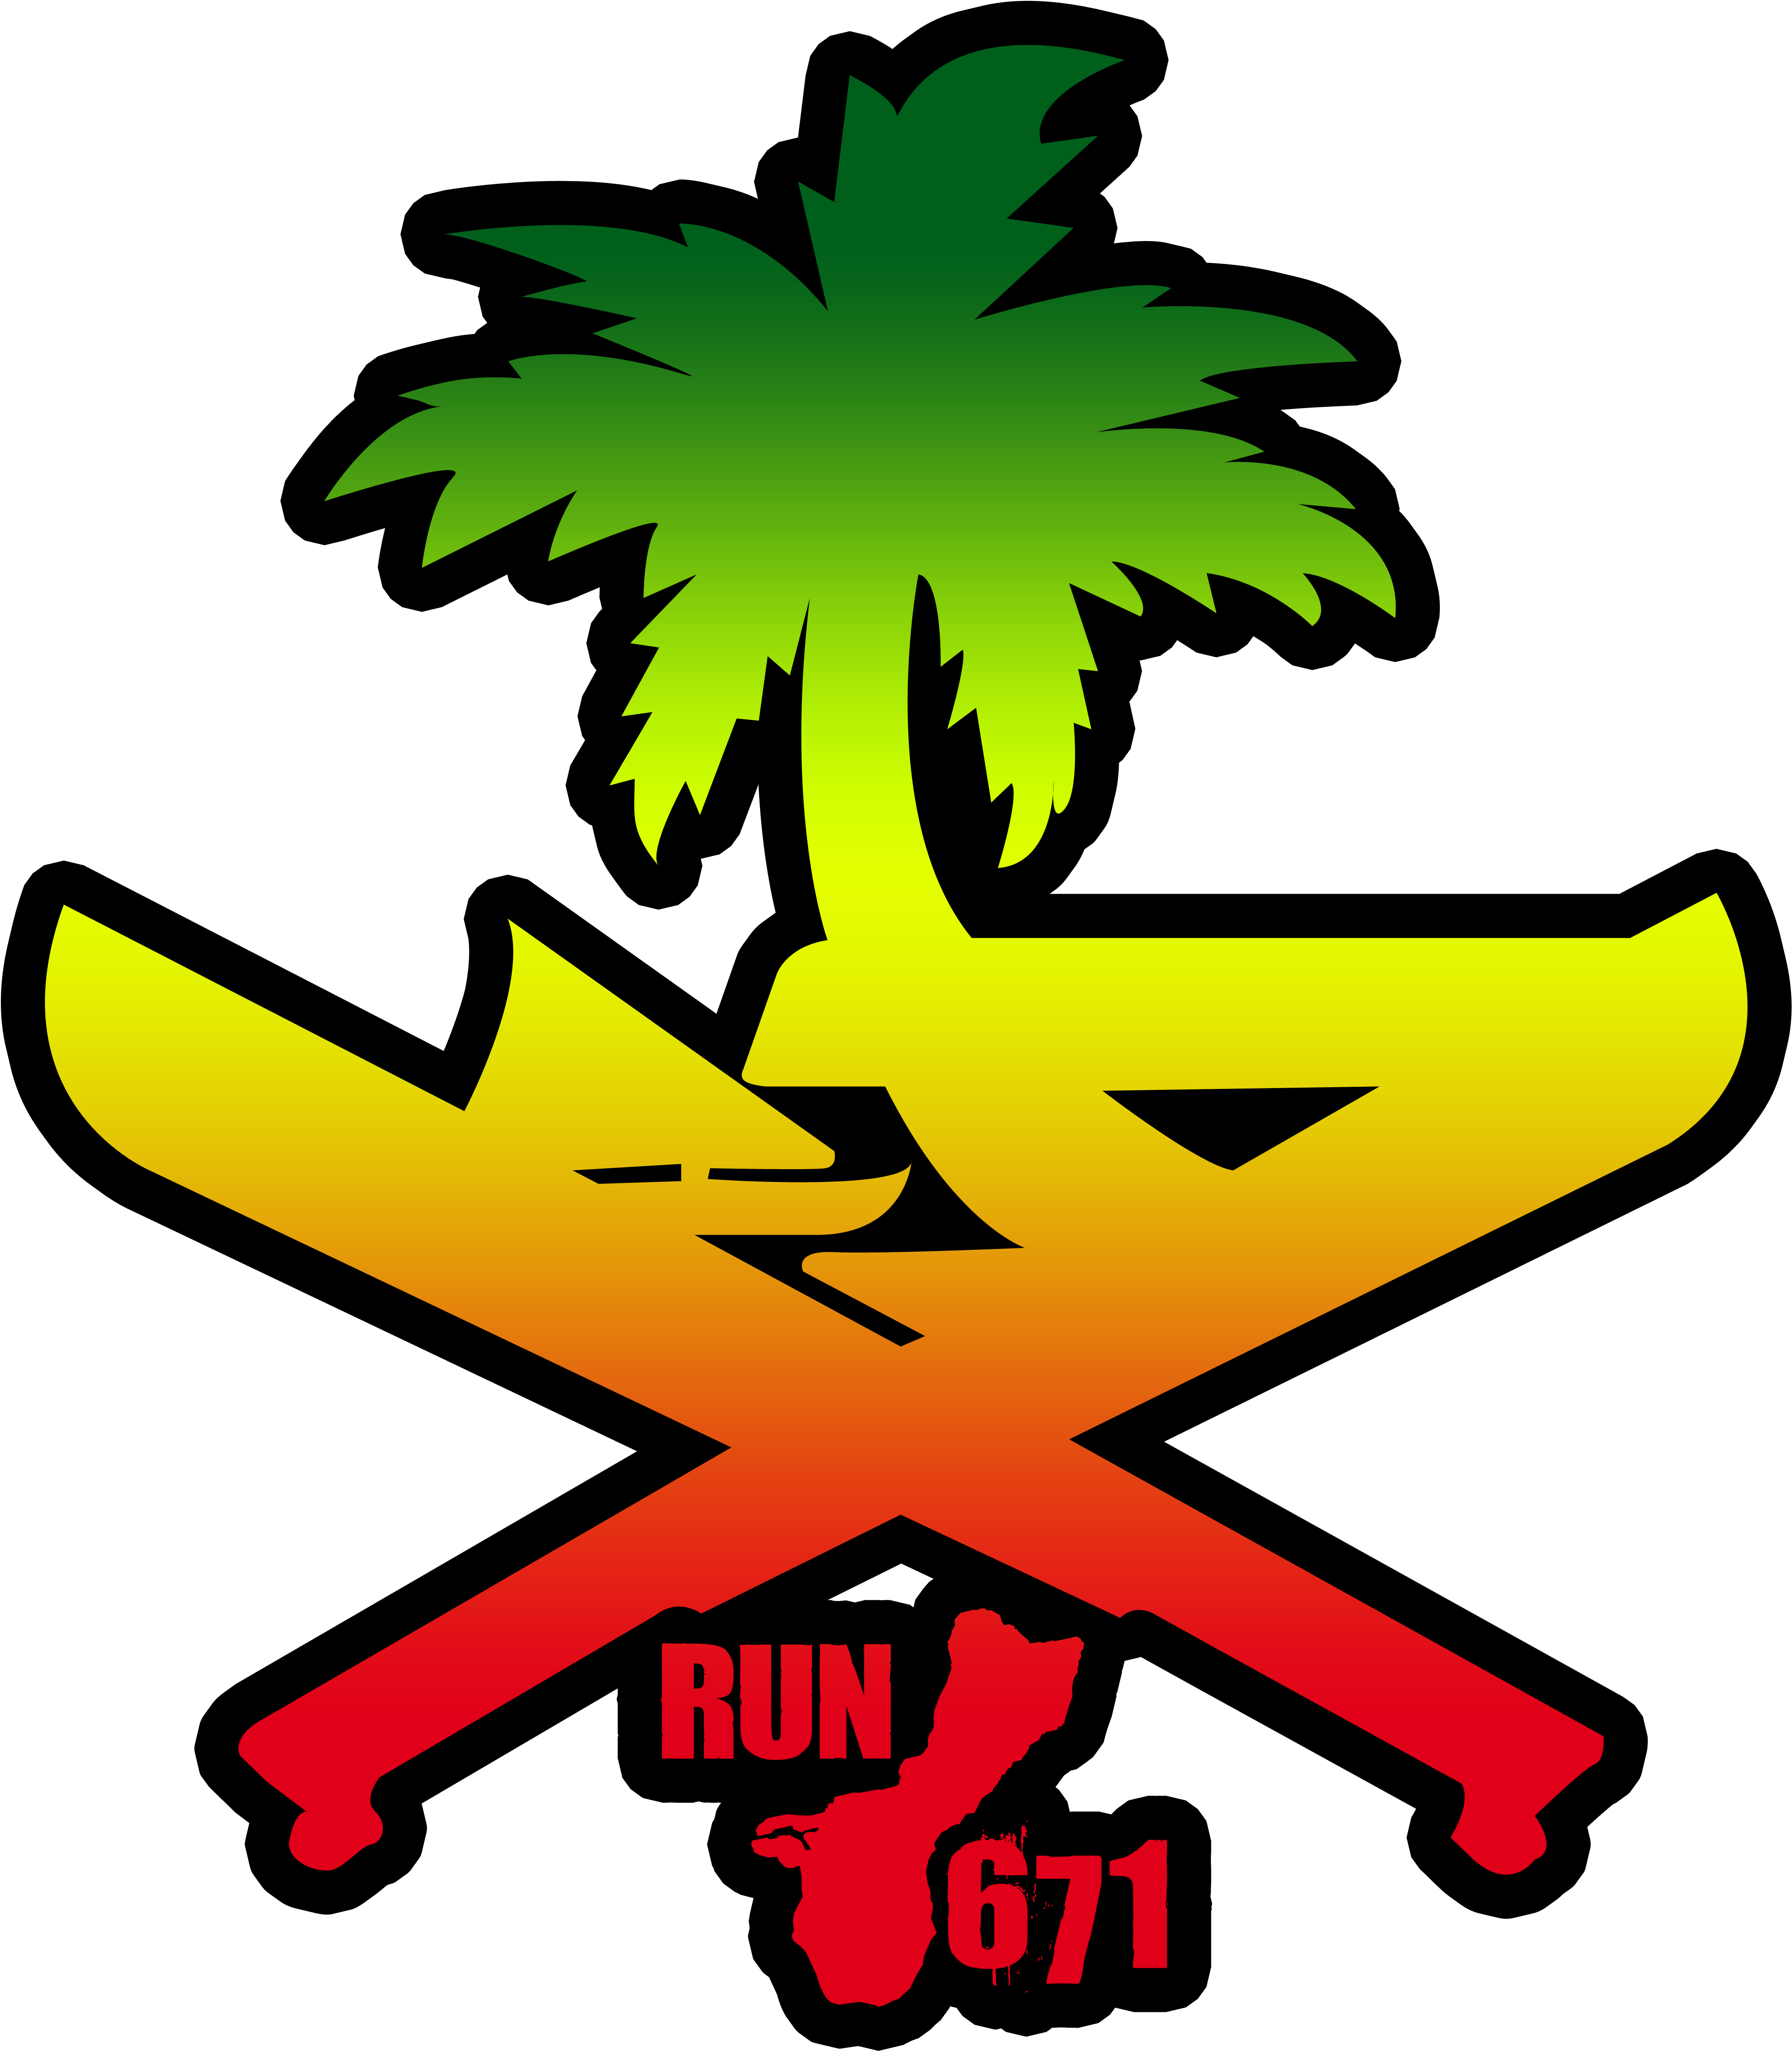 A Logo With Palm Tree And A Couple Of Skis